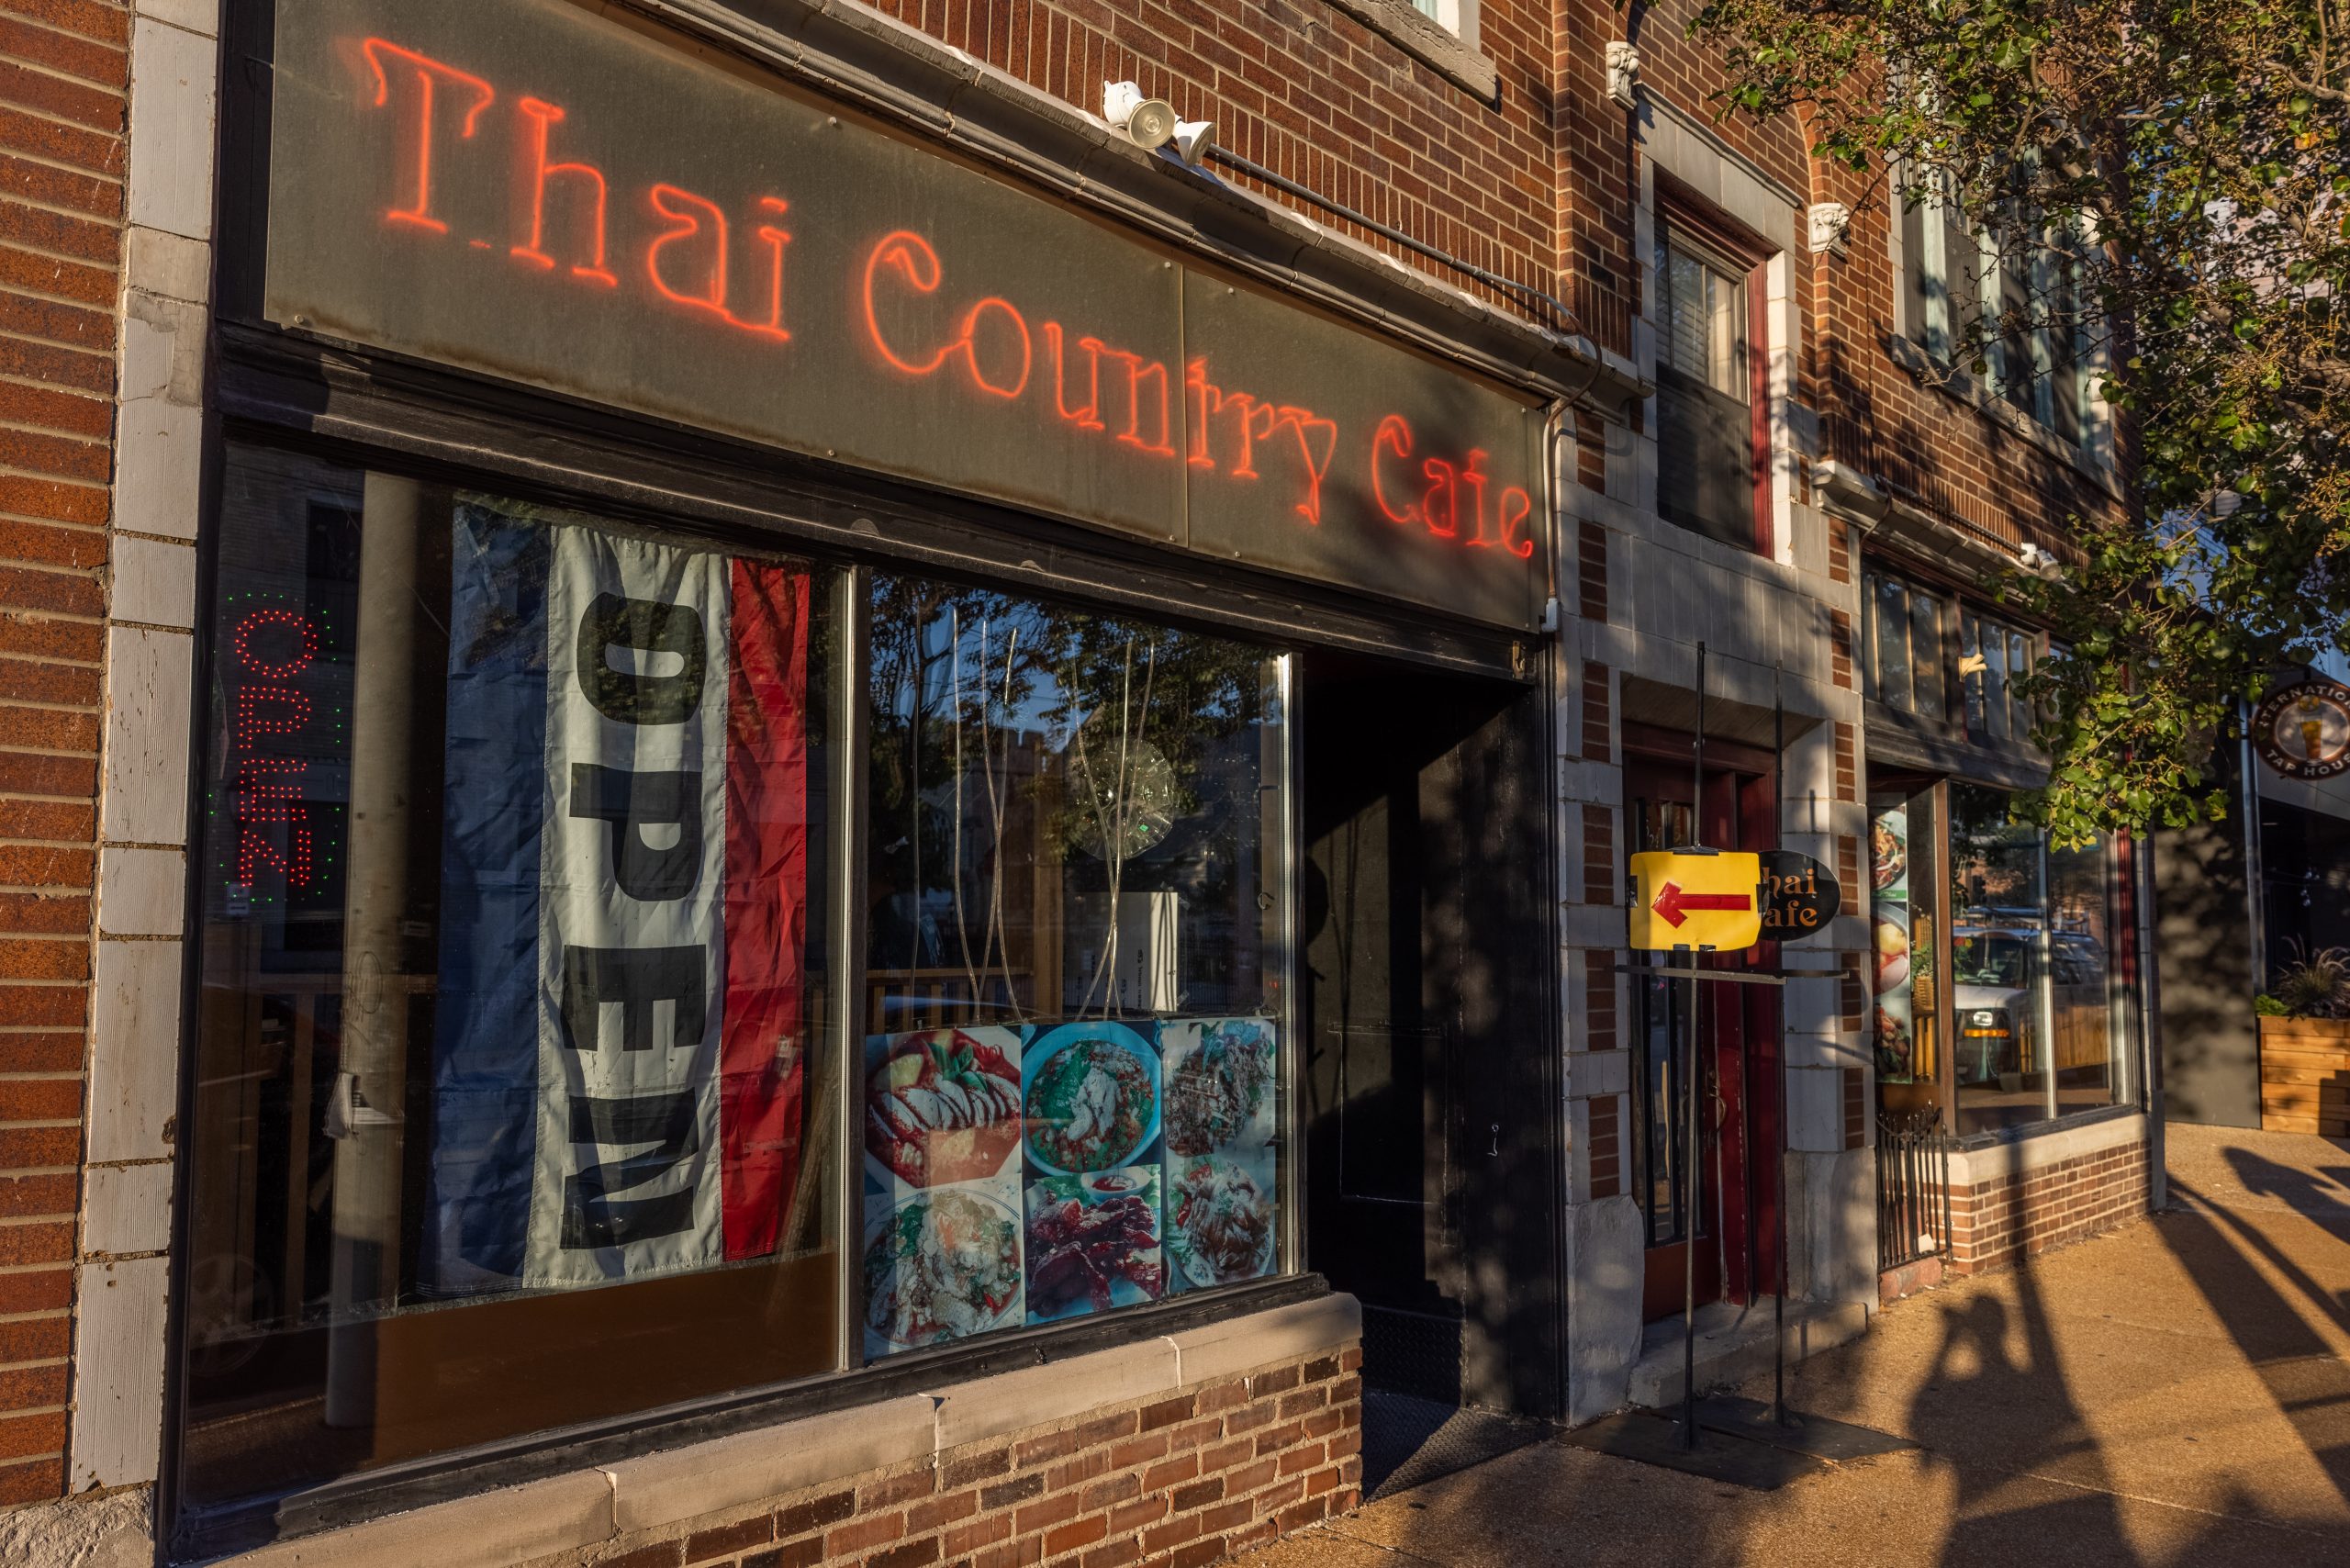 A brick storefront displays a neon sign reading "Thai Country Cafe" and a flag reading "OPEN."